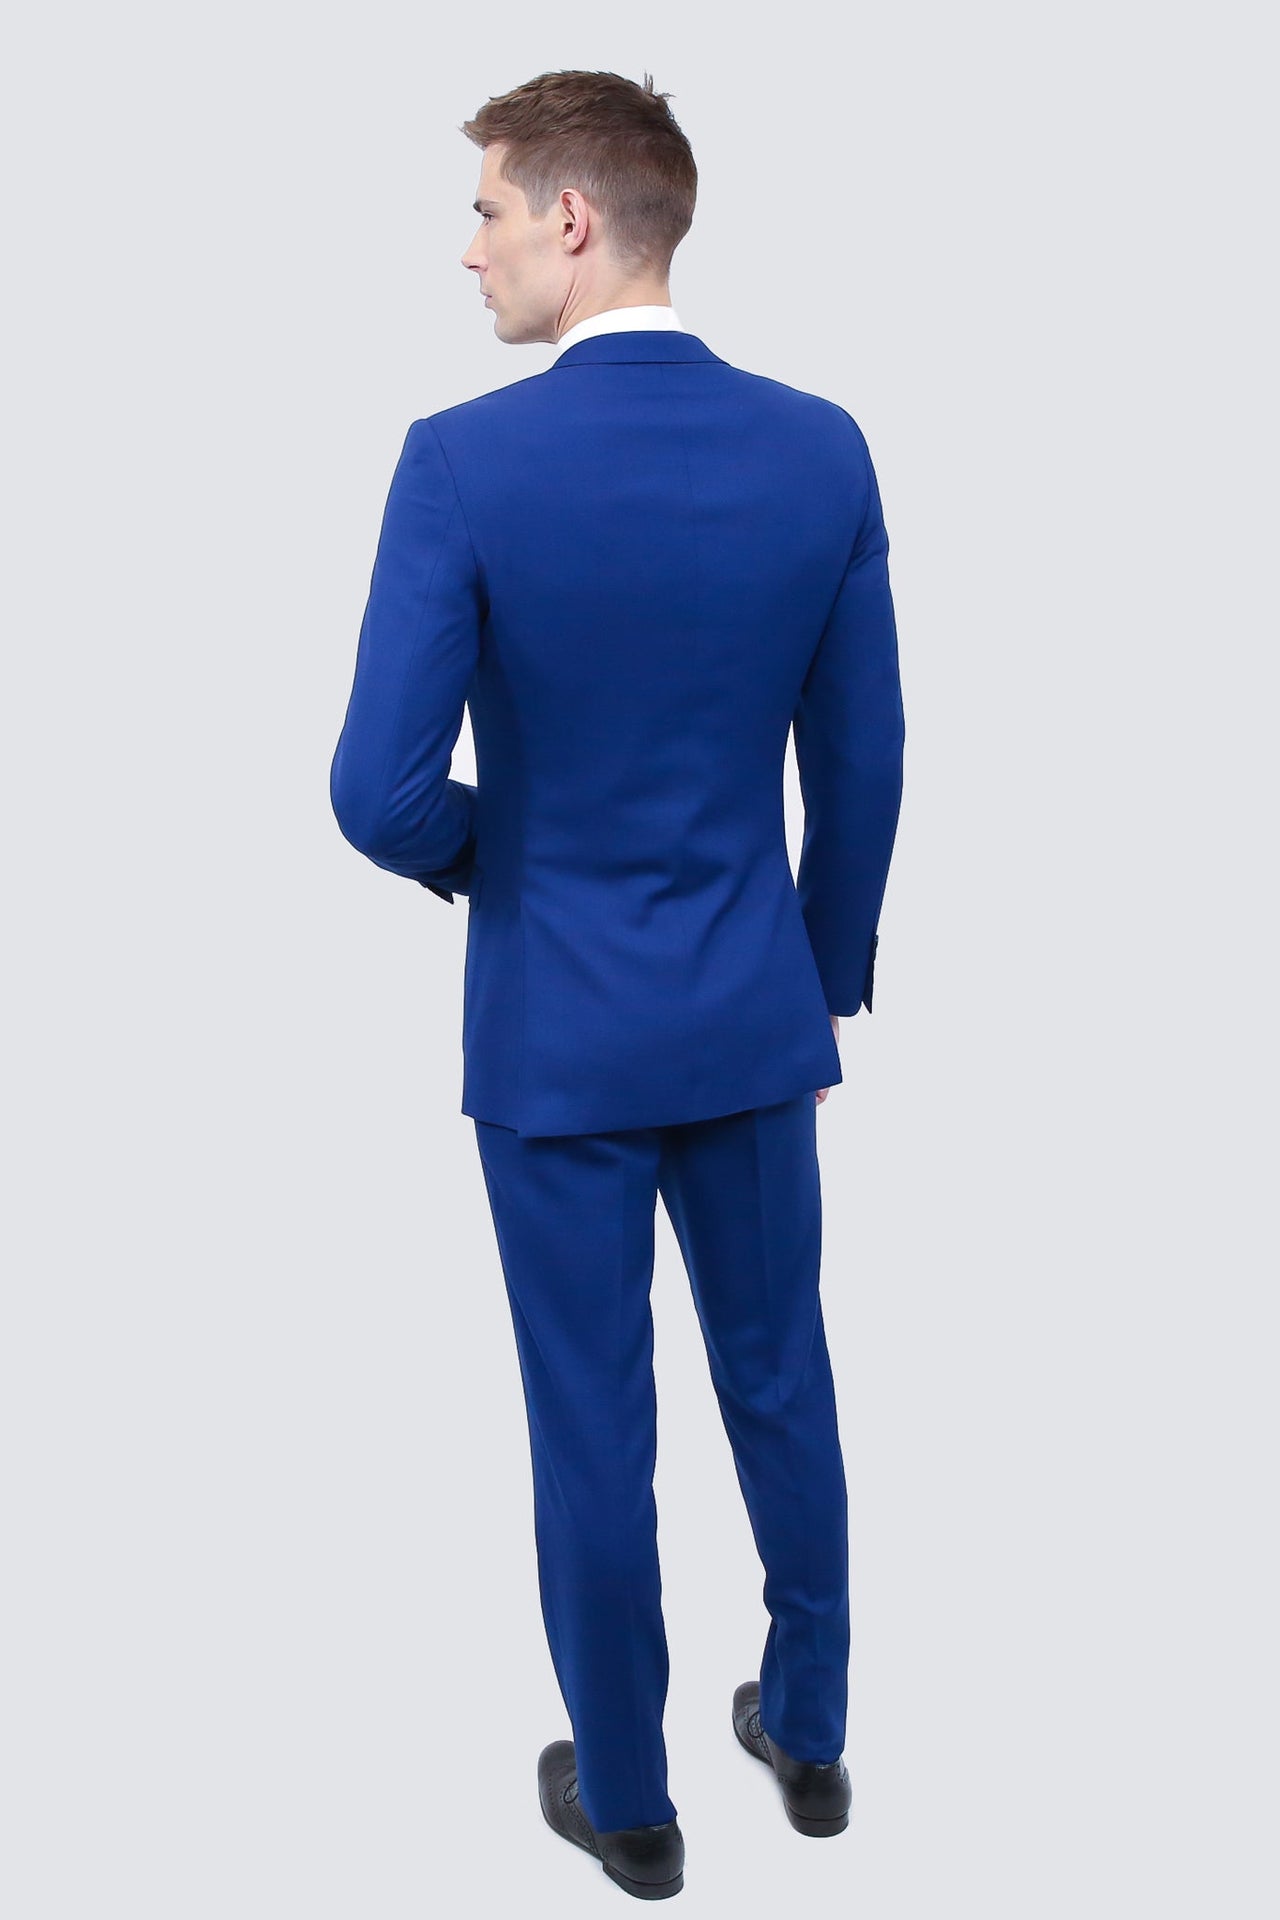 Tailor's Stretch Blend Suit | French Blue Modern or Slim Fit - Tomasso Black